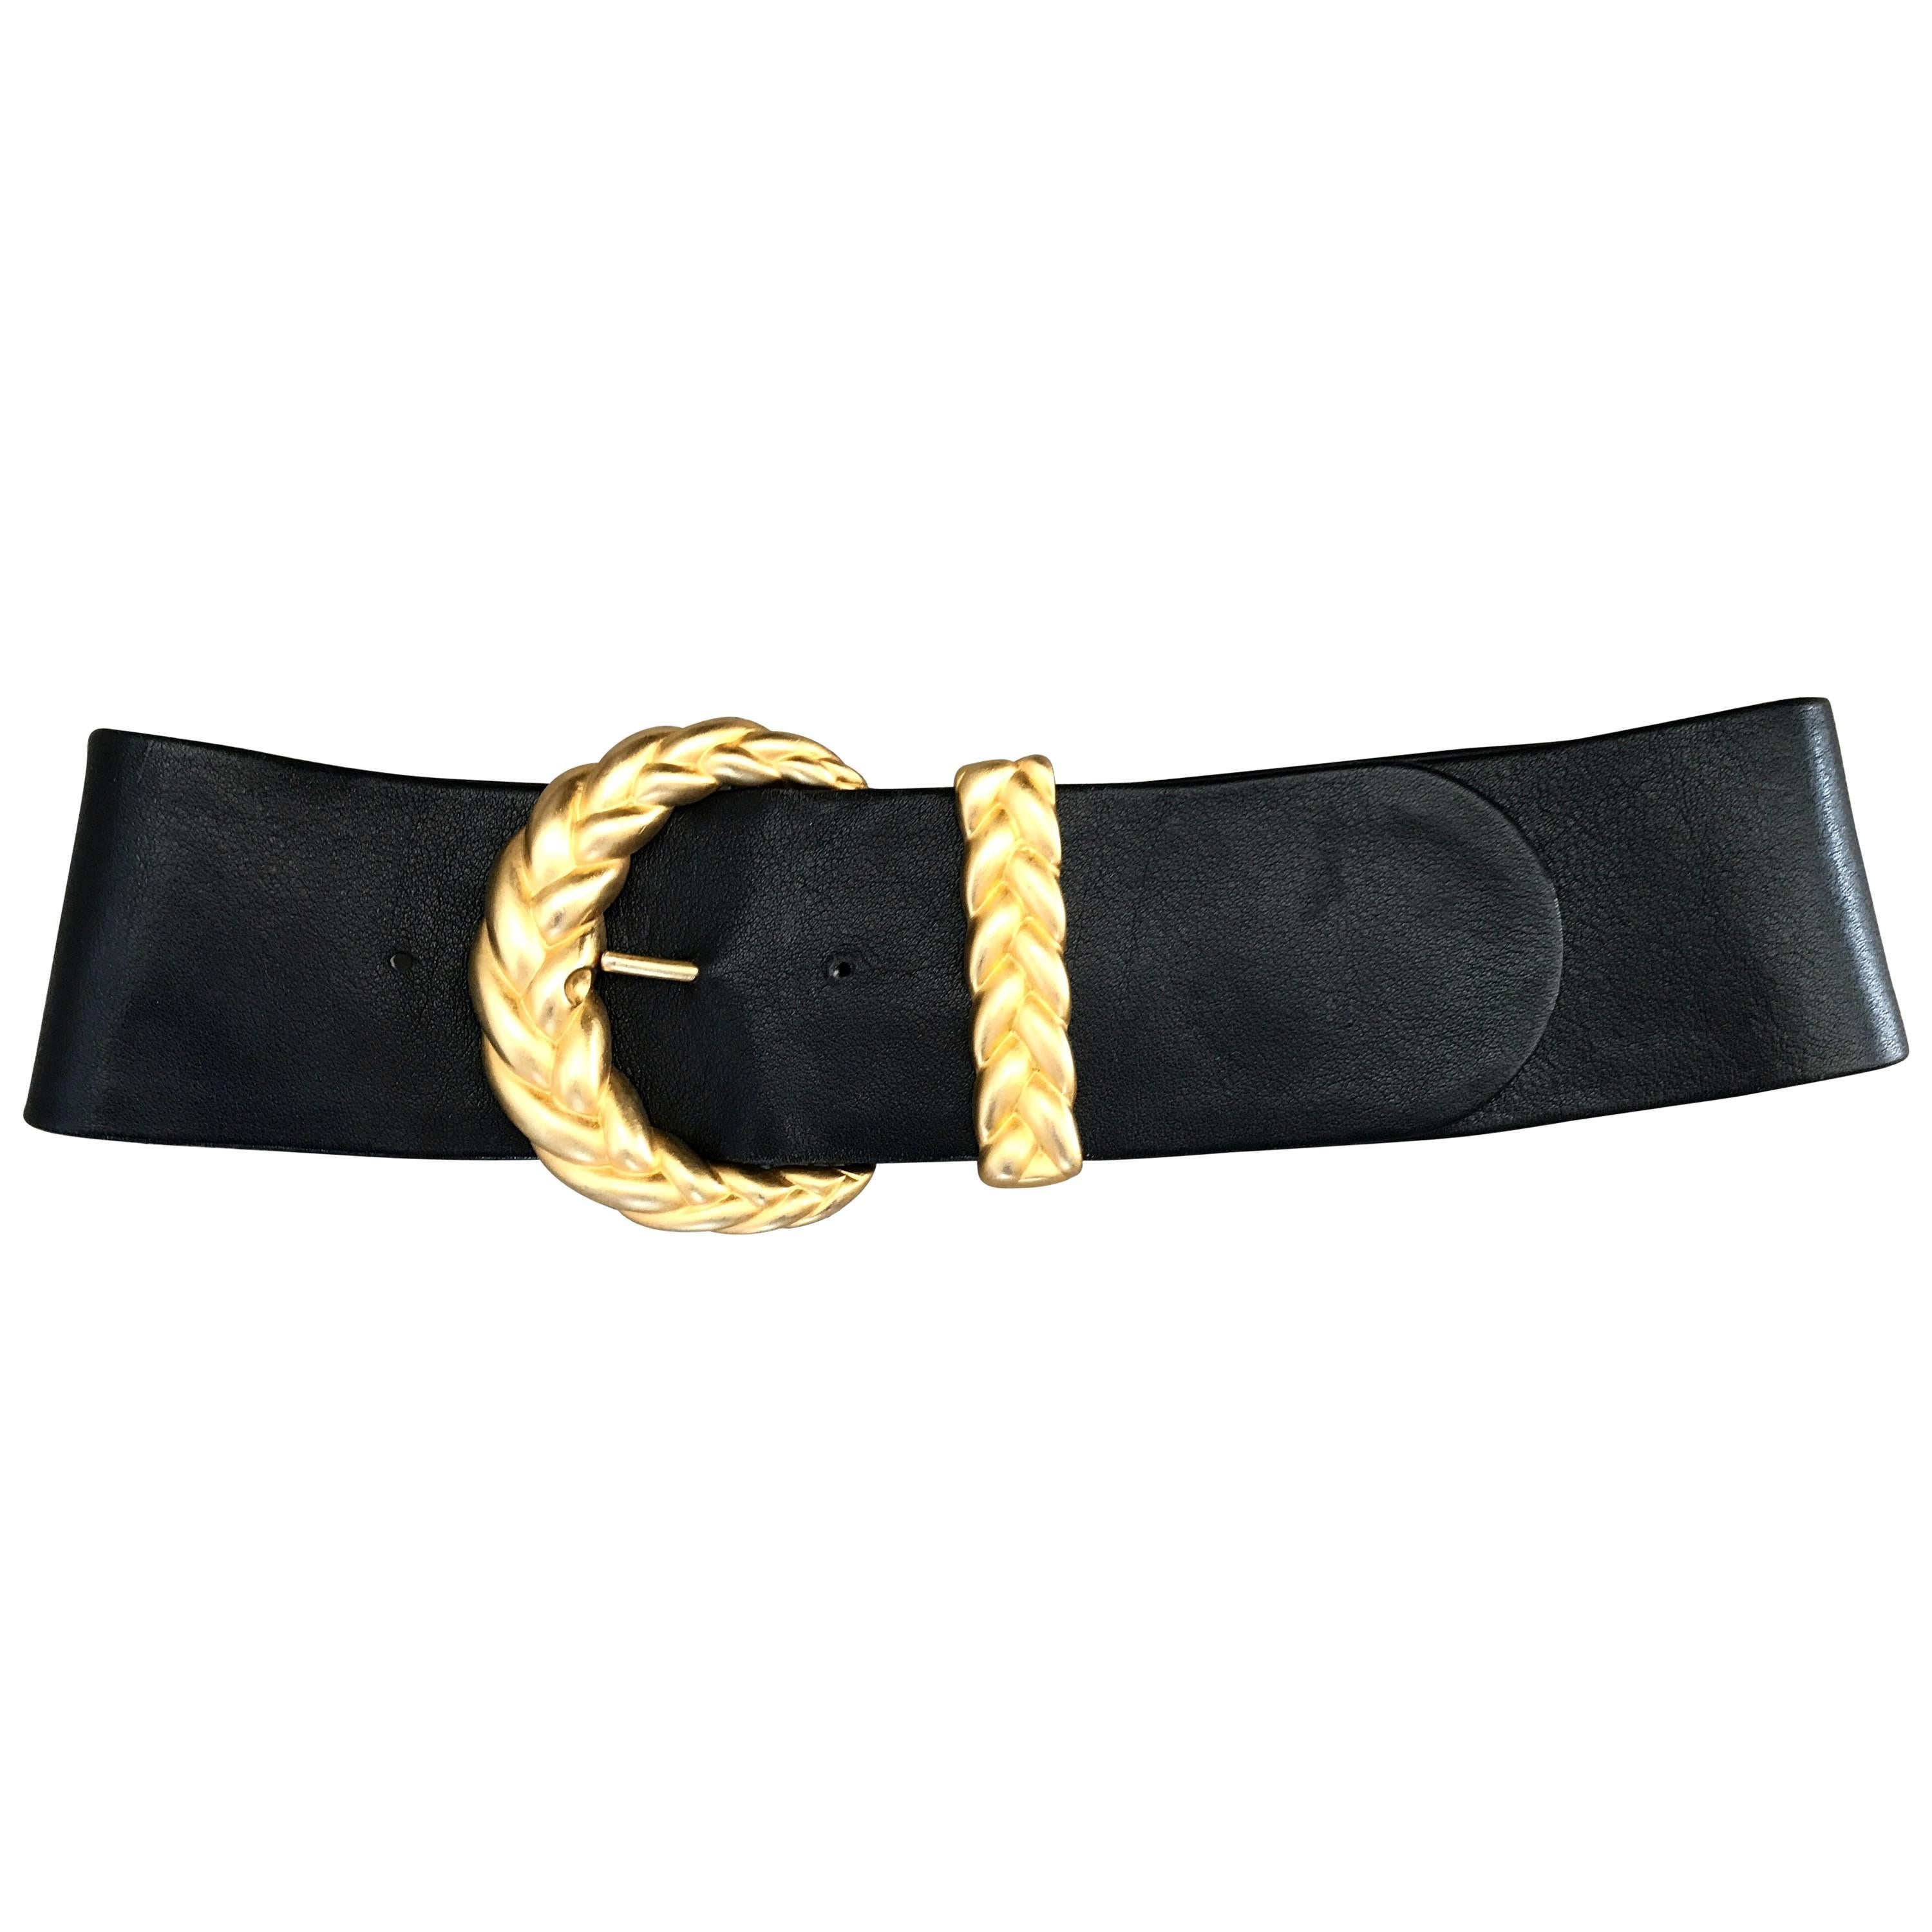 Chic 1990s Anne Klein for Calderon Black and Gold Vintage 90s Classic Wide Belt